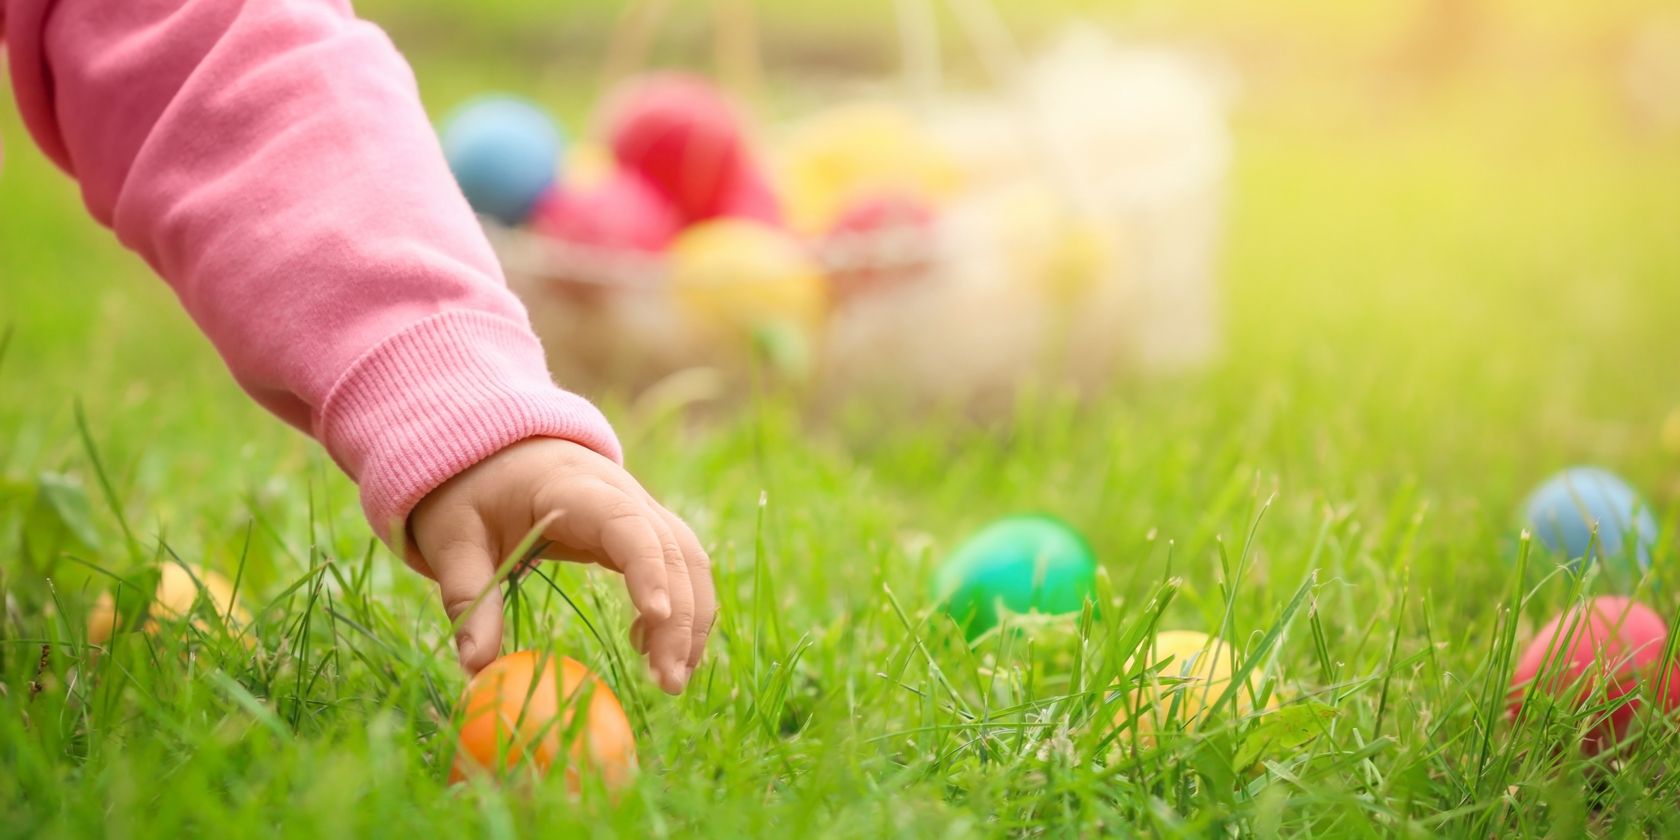 Child's hand picking up Easter egg in the grass